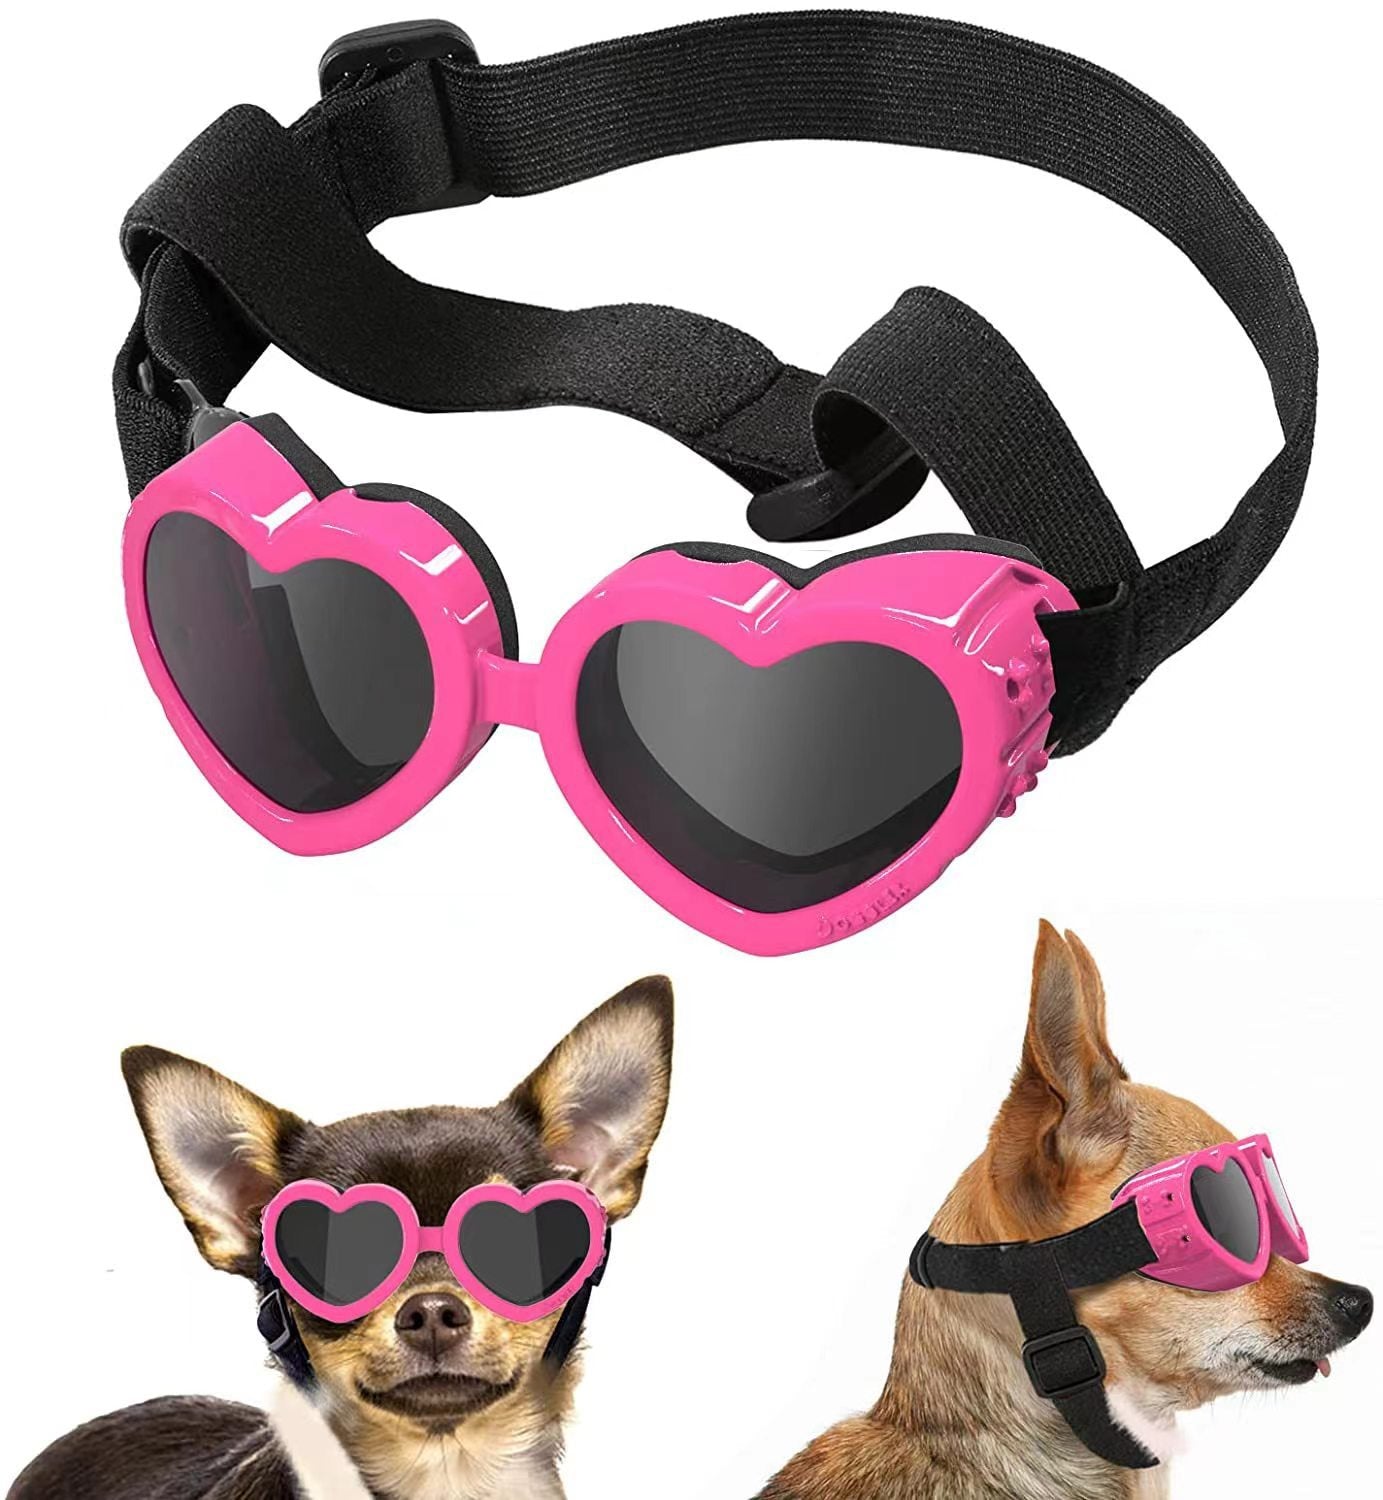 Pet Windproof Glasses
 
 Product Information:
 
 
 Material: TPEE+pc
 
 Color: Pink, blue, black, red, yellow, white
 
 Size: even size
 
 Size: 13.5*3.5cm
 
 
 
 Packing list:
 
 GlassePet AccessoriesPoochPlus.shopPoochPlus.shopPet Windproof Glasses